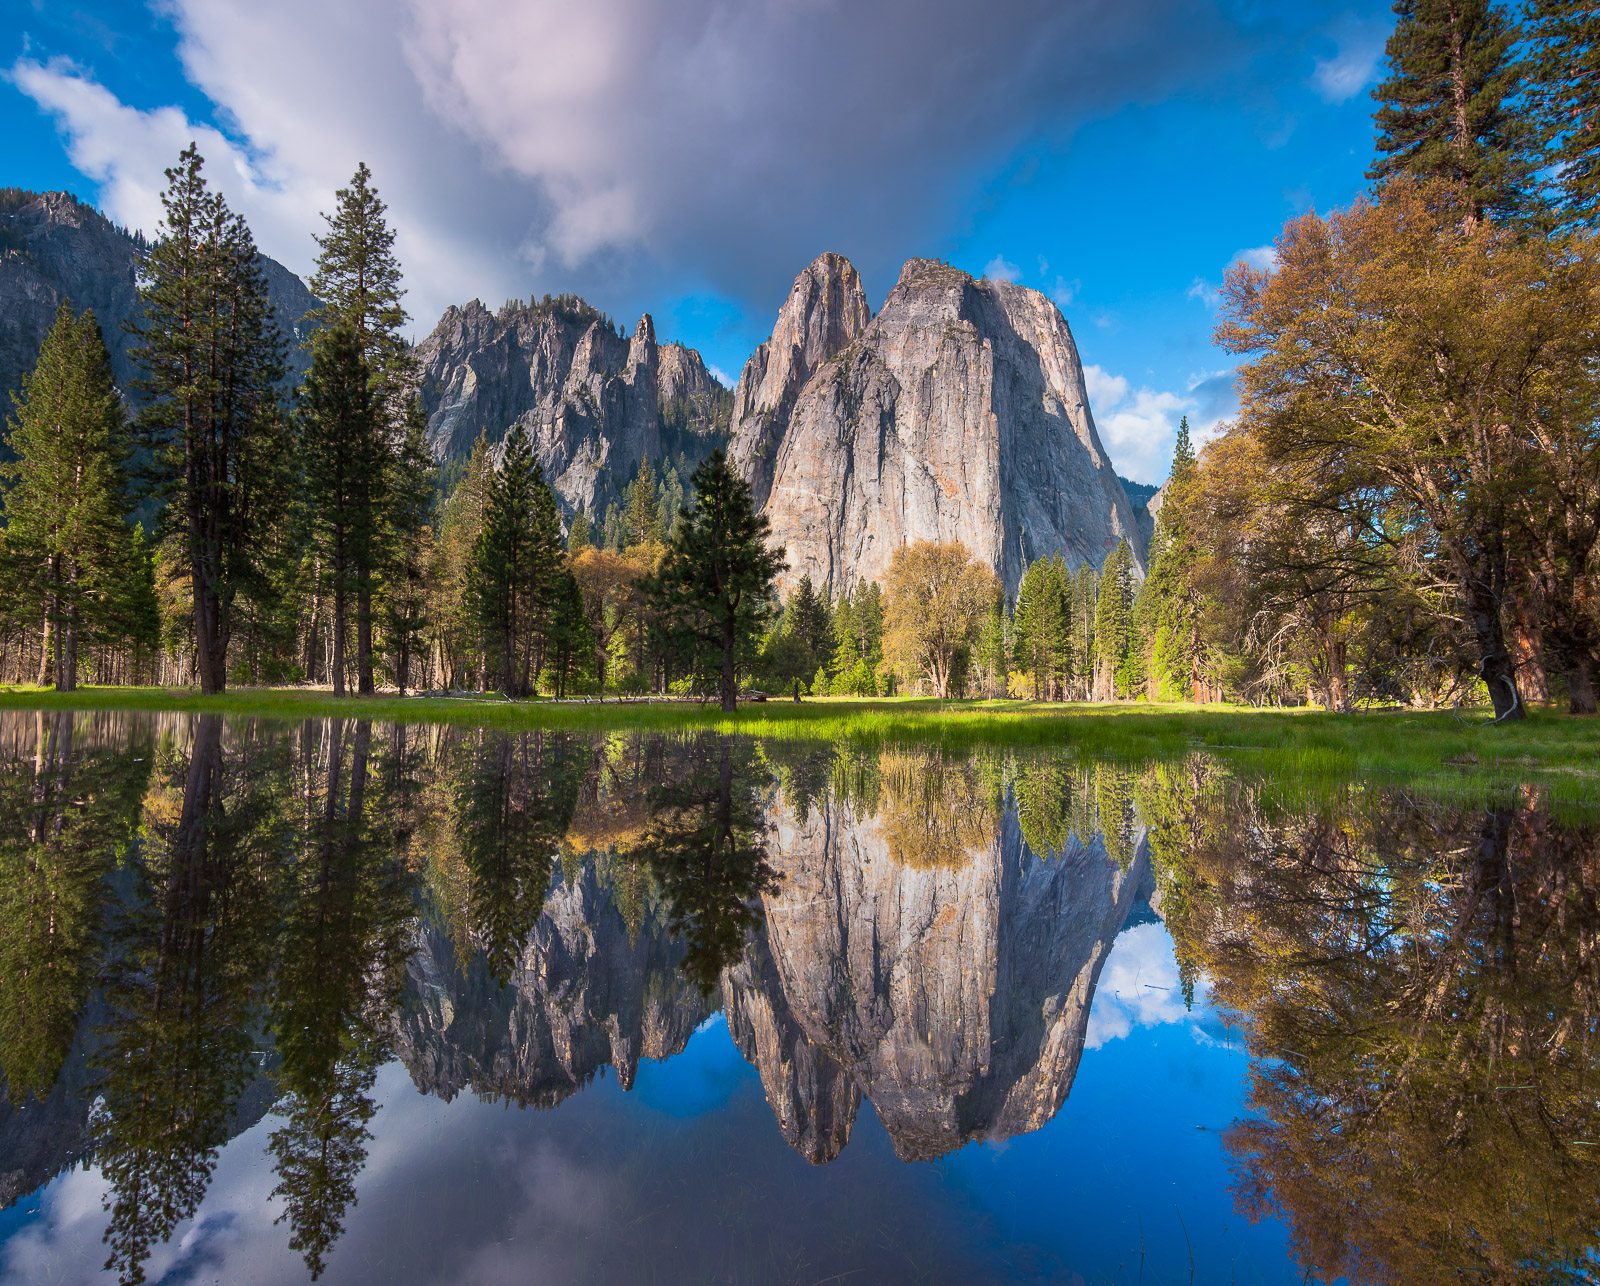 Spring melt creates reflections of the Cathedral Range with clouds stirring around the peaks. A wonderful day in Yosemite.